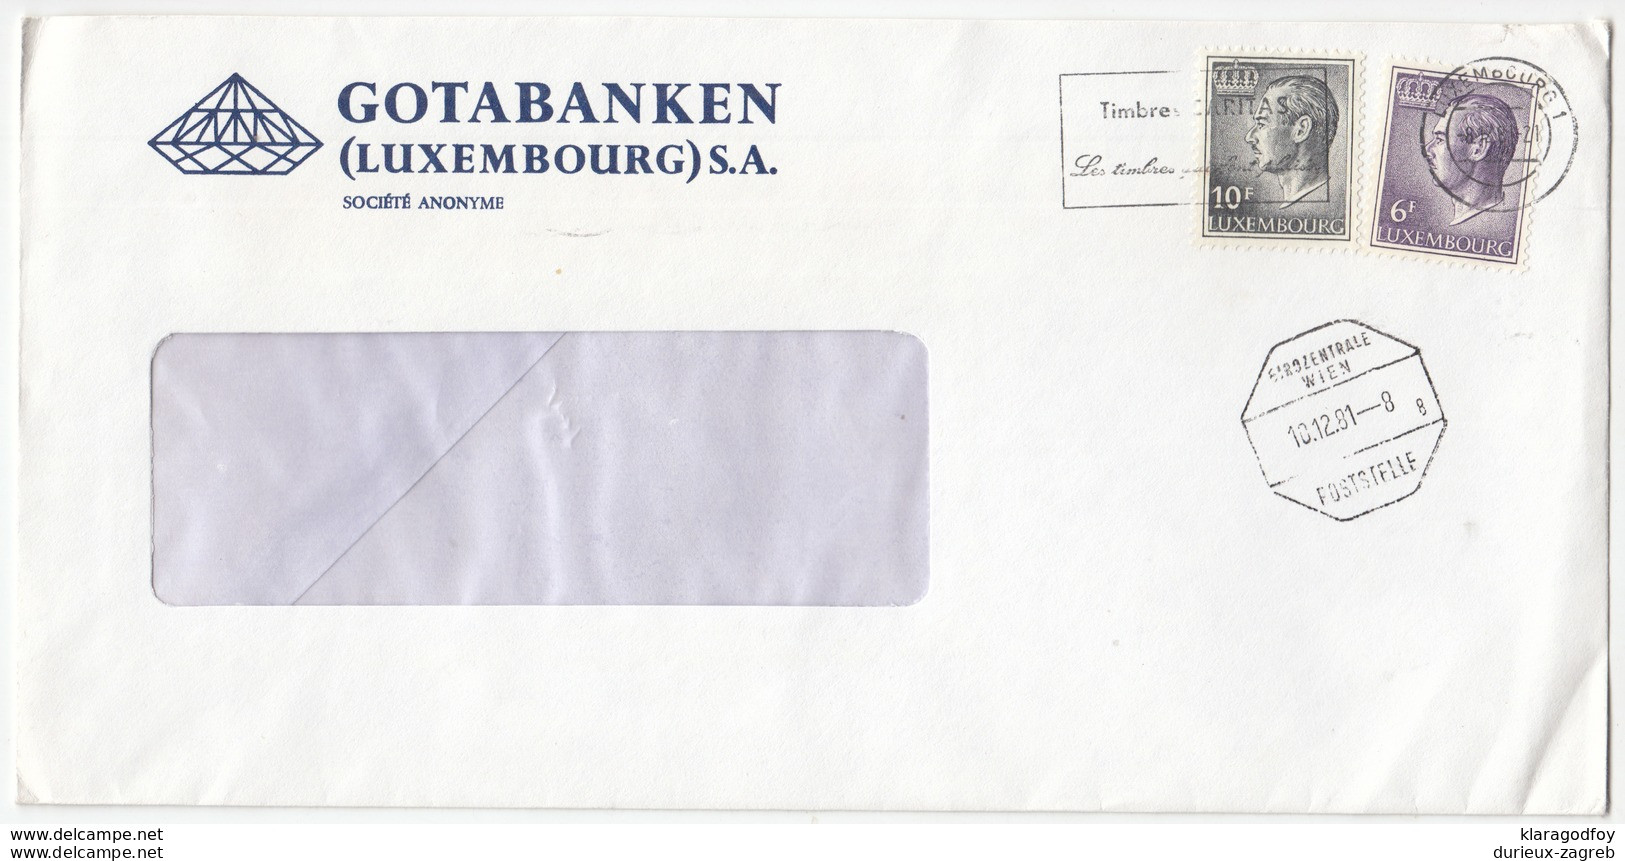 Gotabanken Company Letter Cover Travelled 1981 B171005 - Covers & Documents